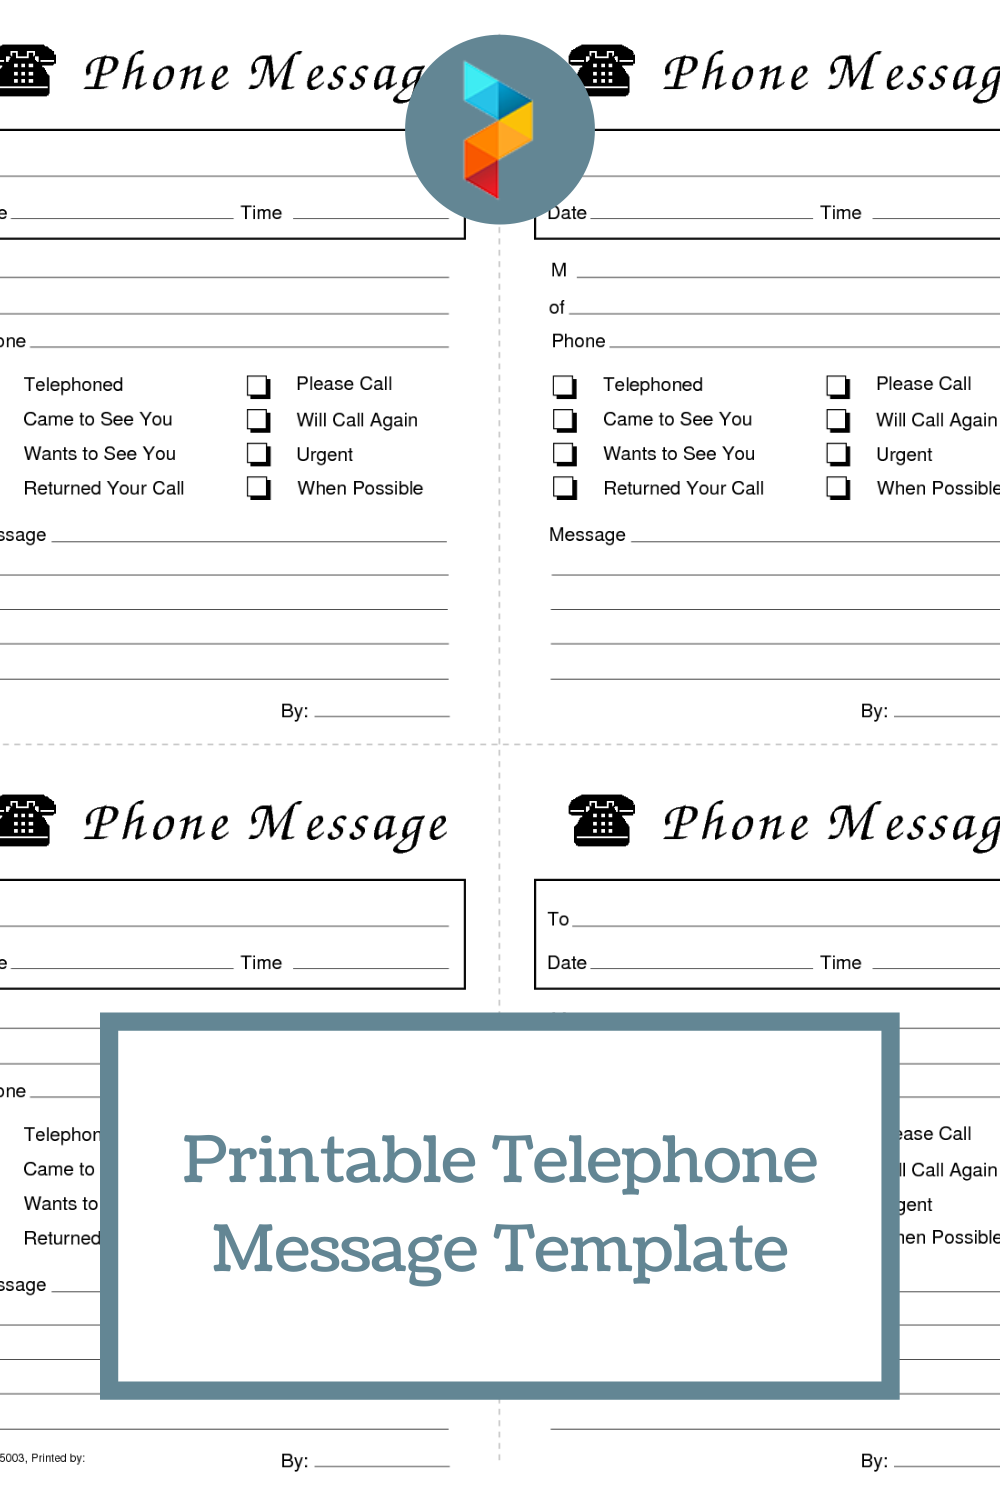 Printable Telephone Message Template